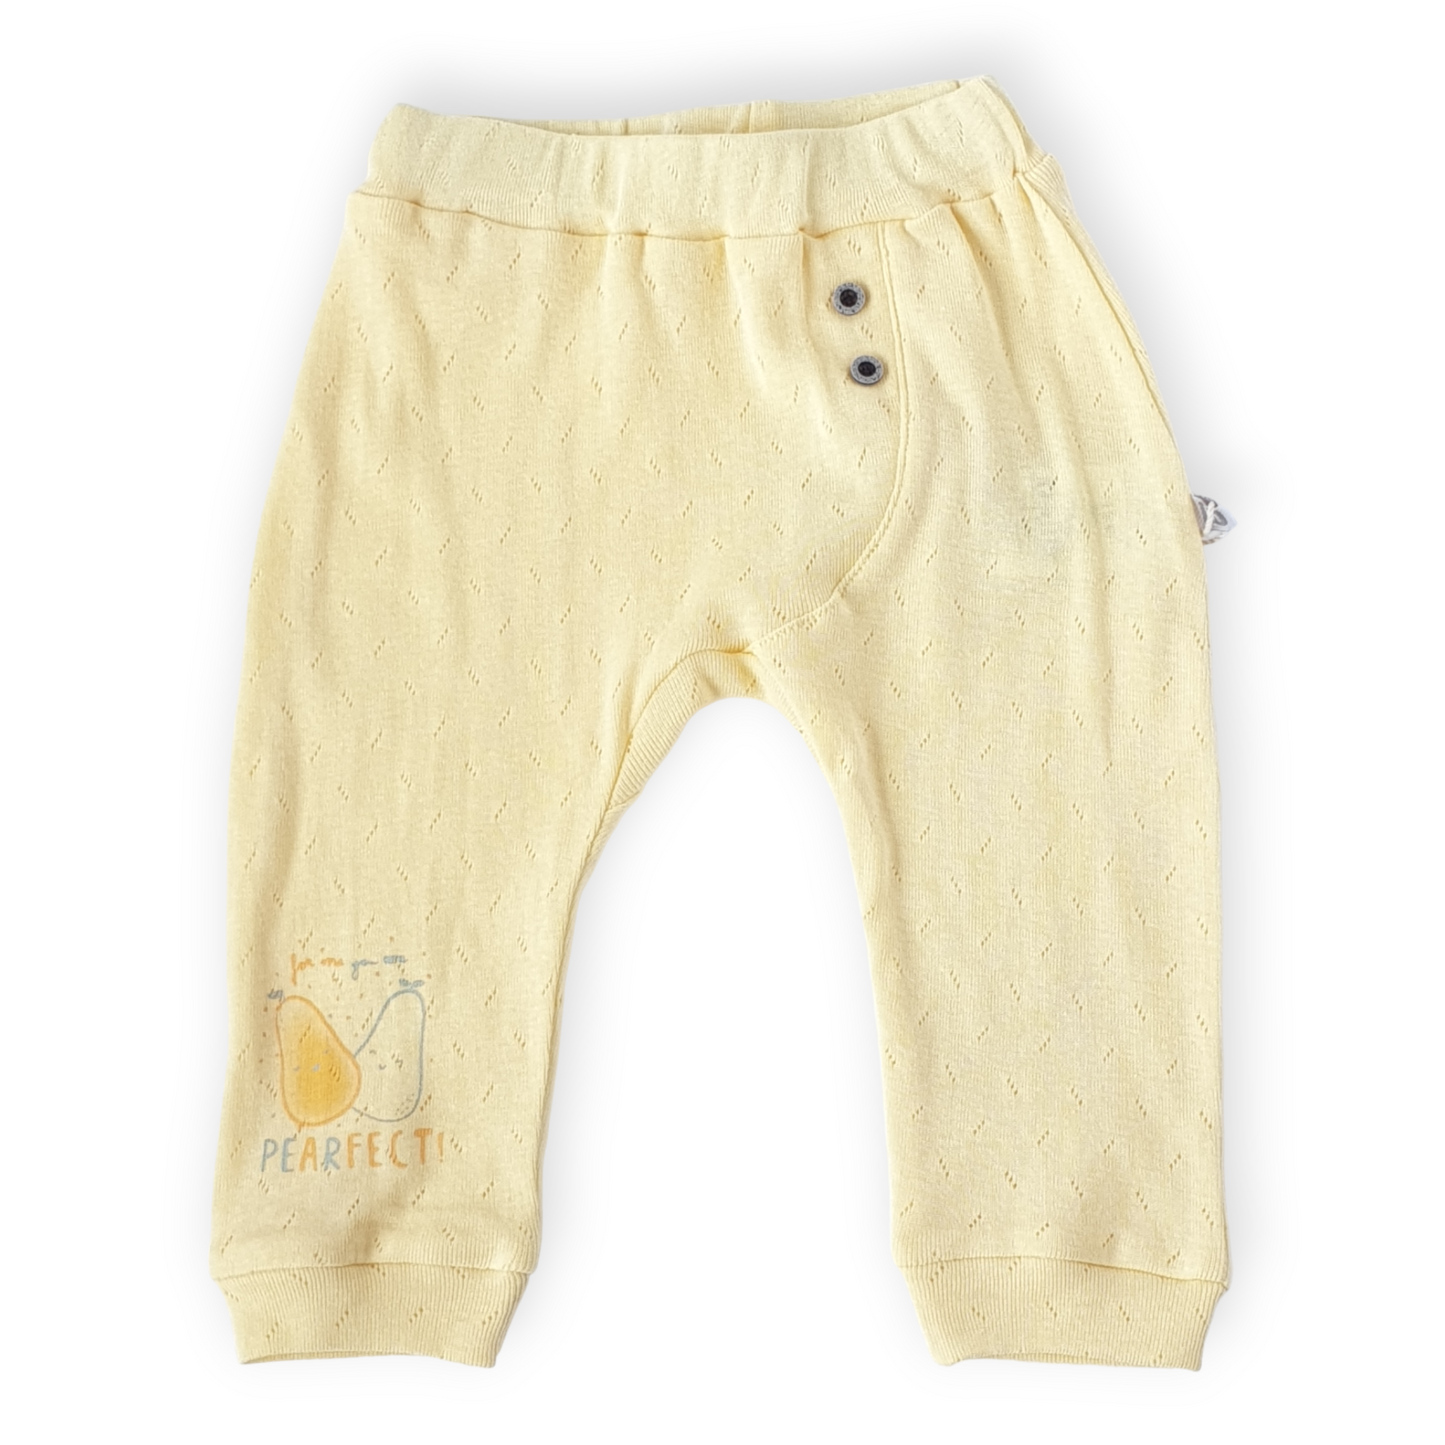 Basic Yellow Footless Pants with Pears